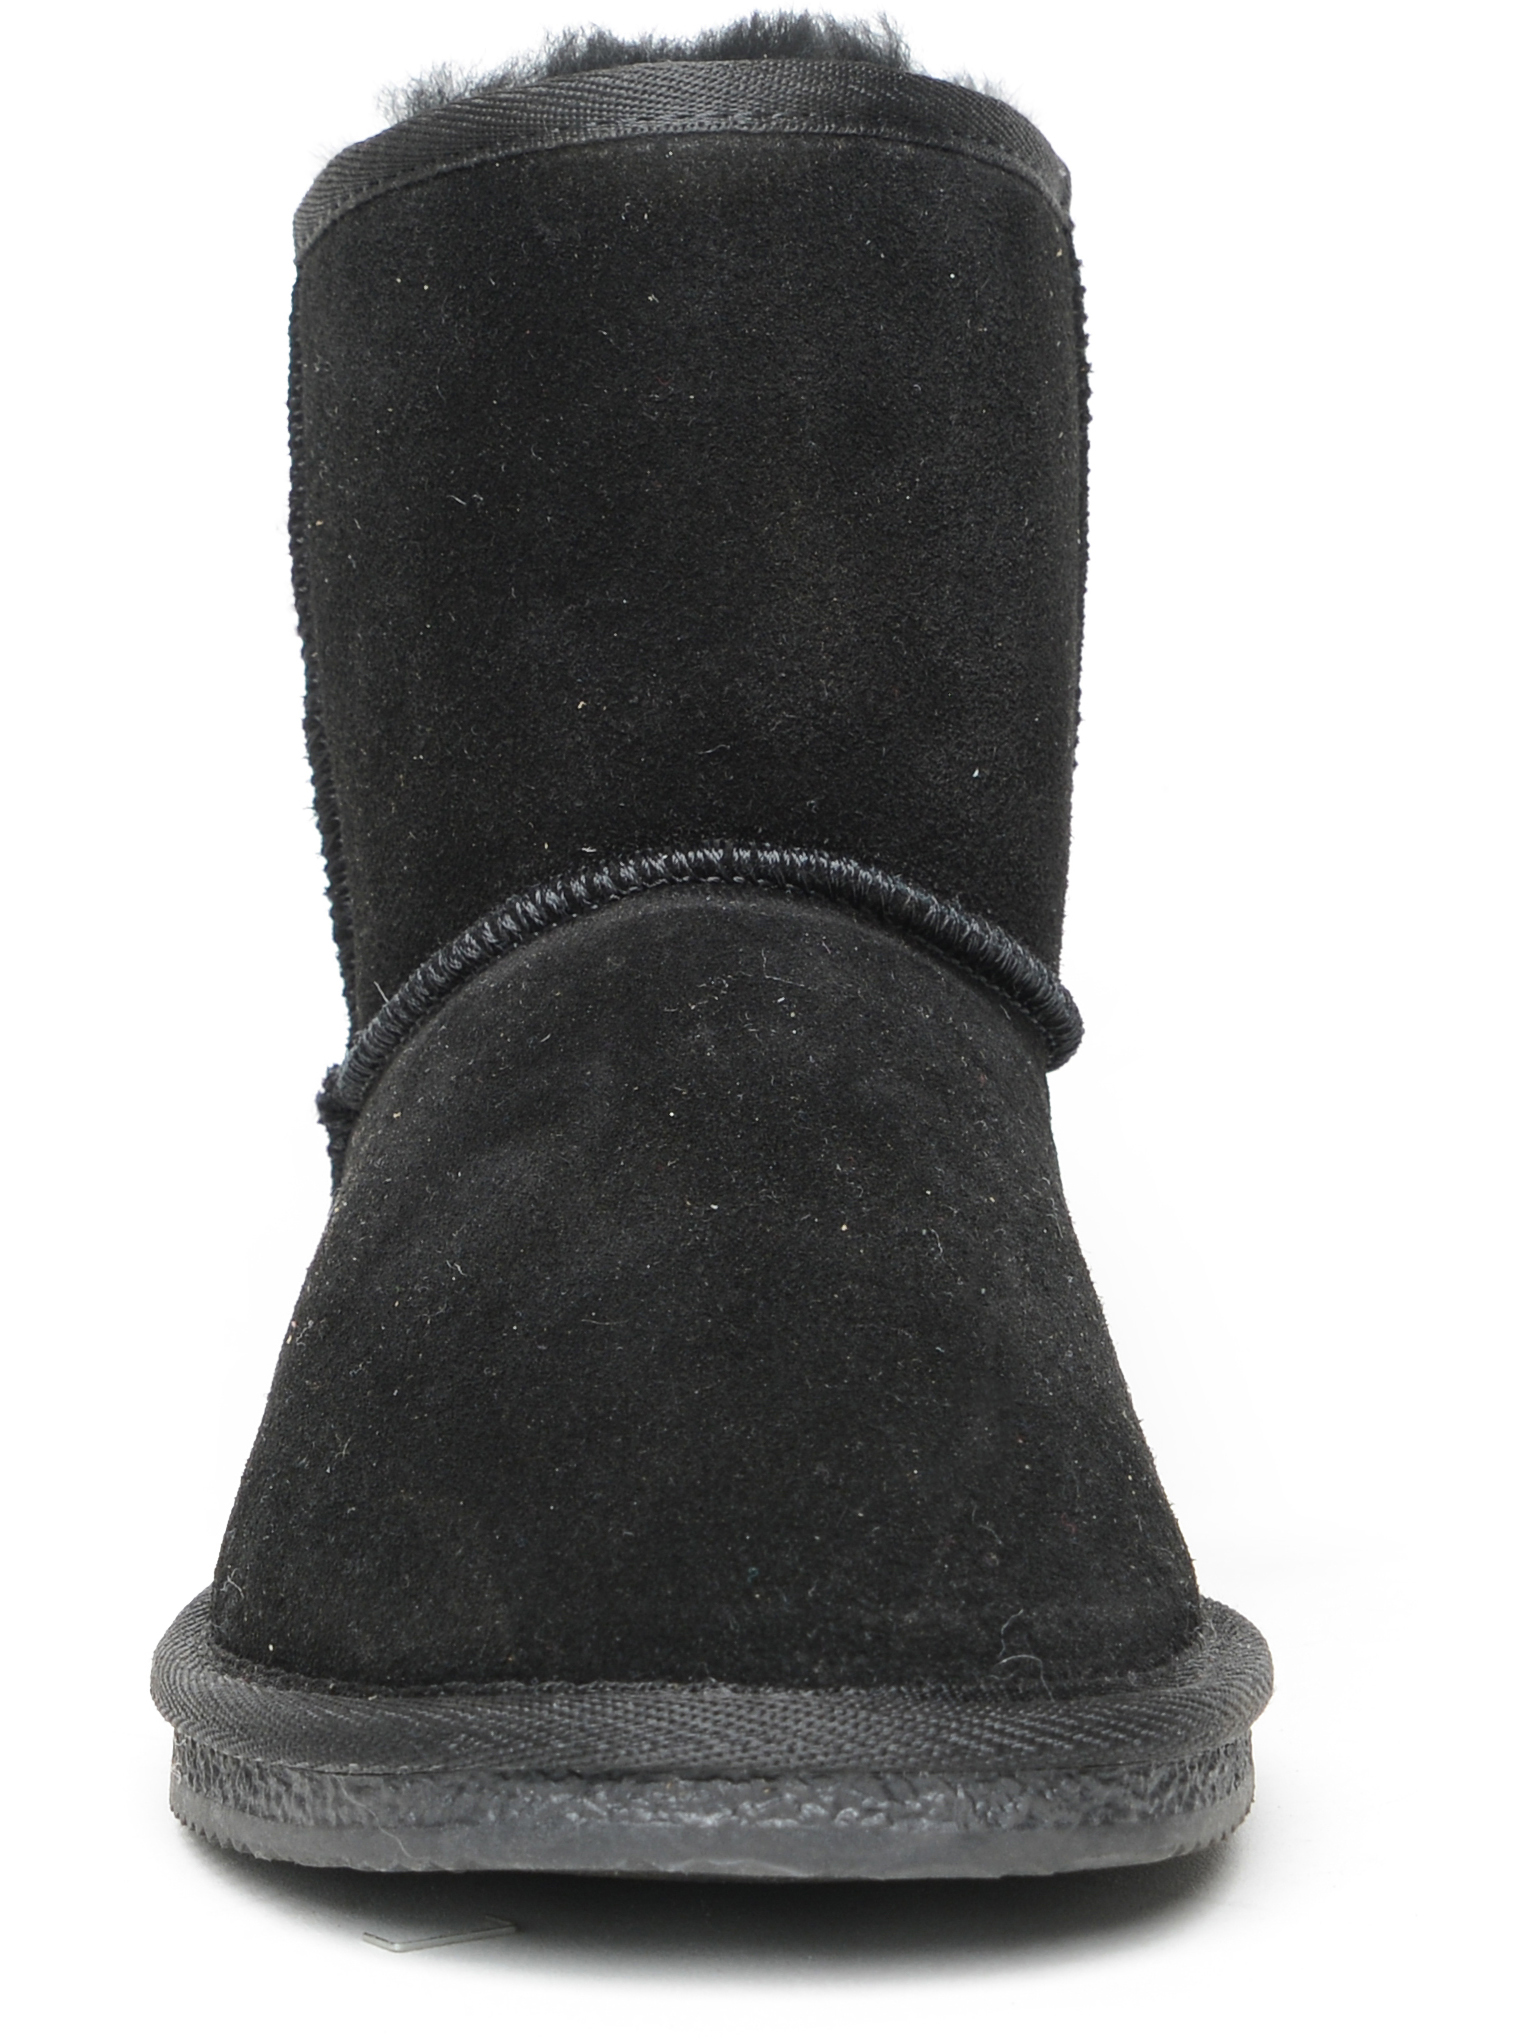 Portland Boot Company Women's Short Cozy Suede Boot - image 4 of 5